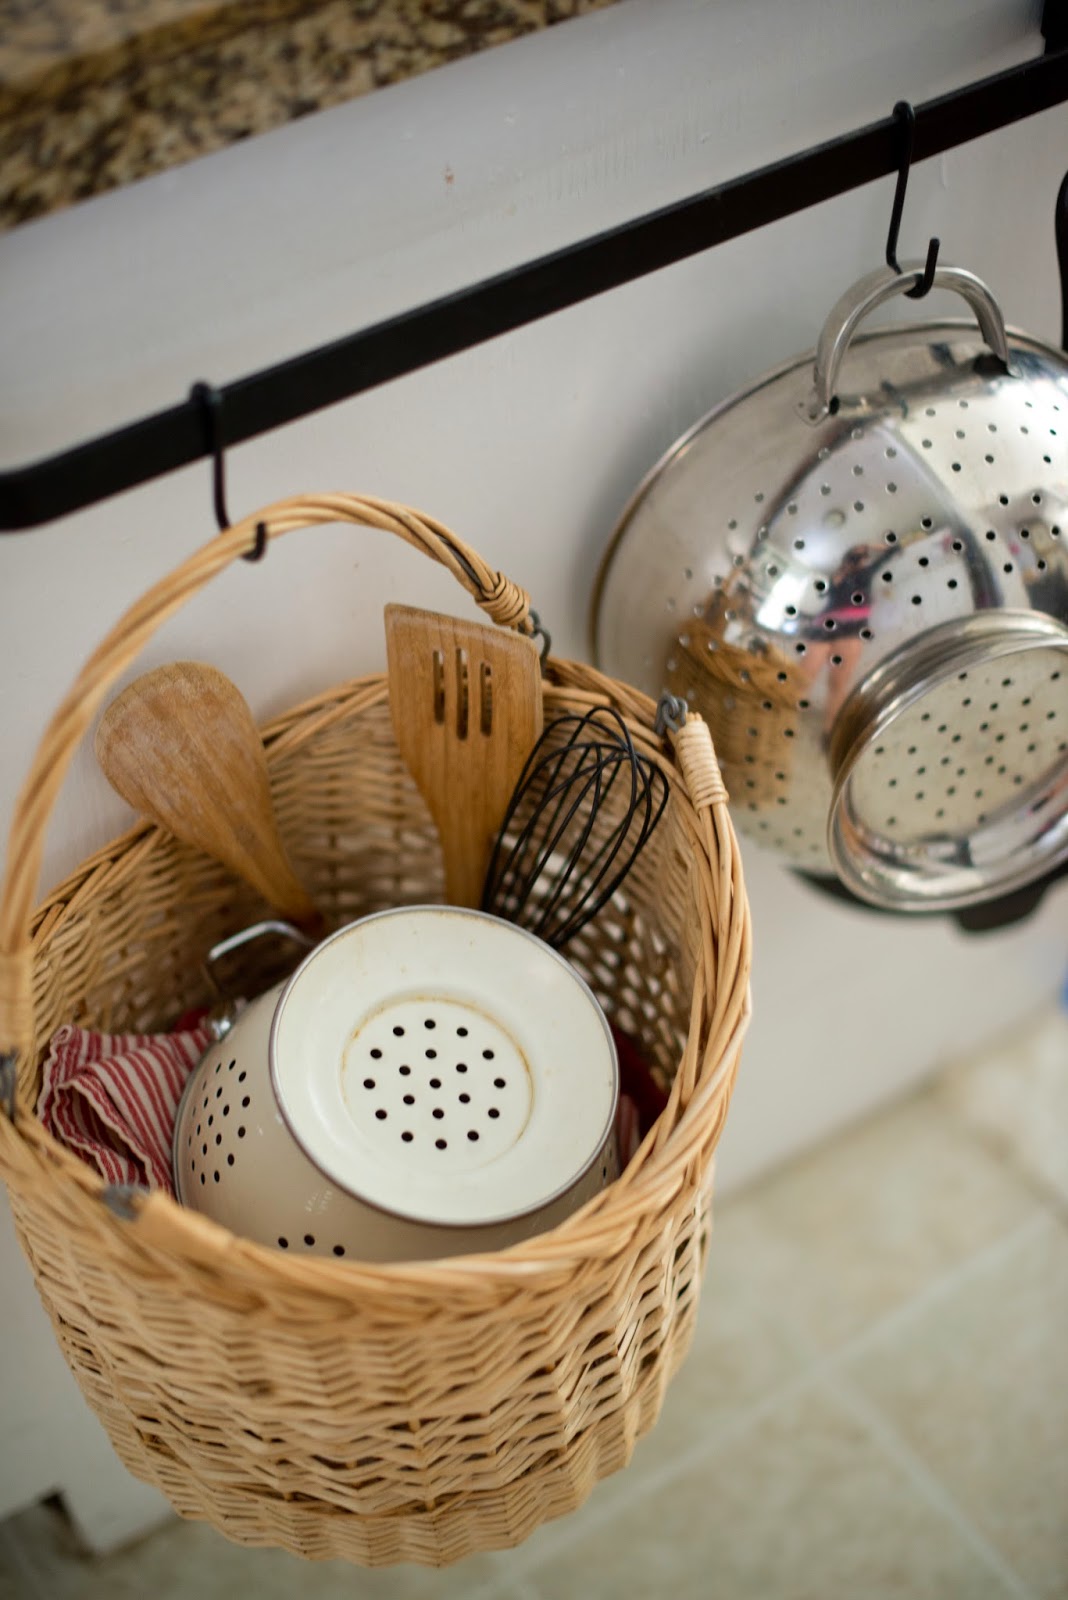 Use a towel bar to hold kitchen supplies. A cute way to organize the kitchen.